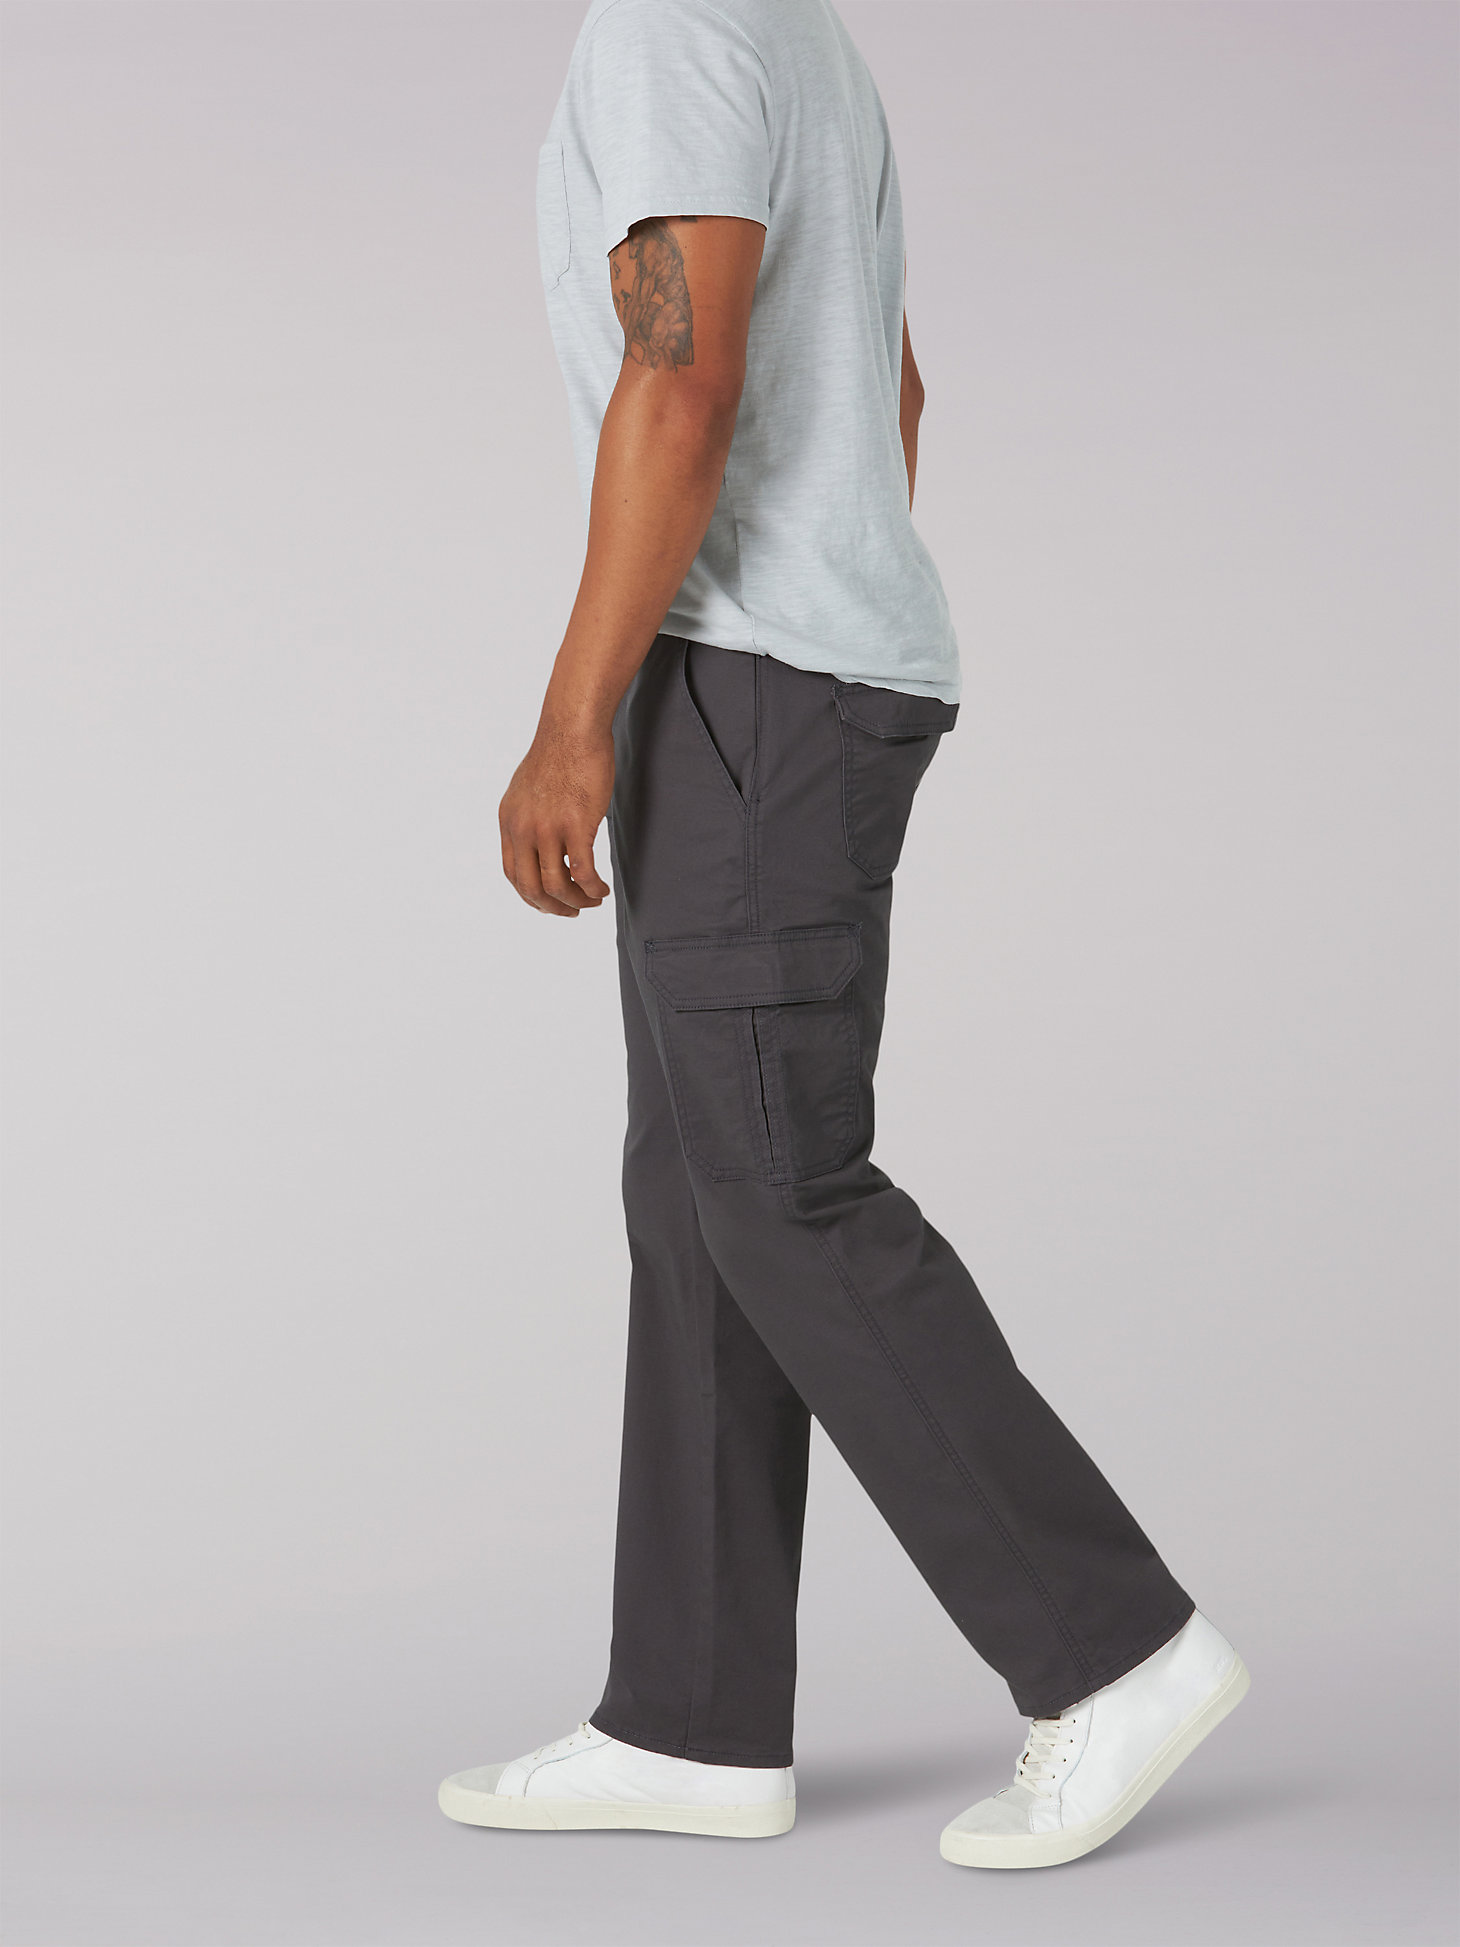 Men's Extreme Comfort Cargo Twill Pant in Charcoal alternative view 2